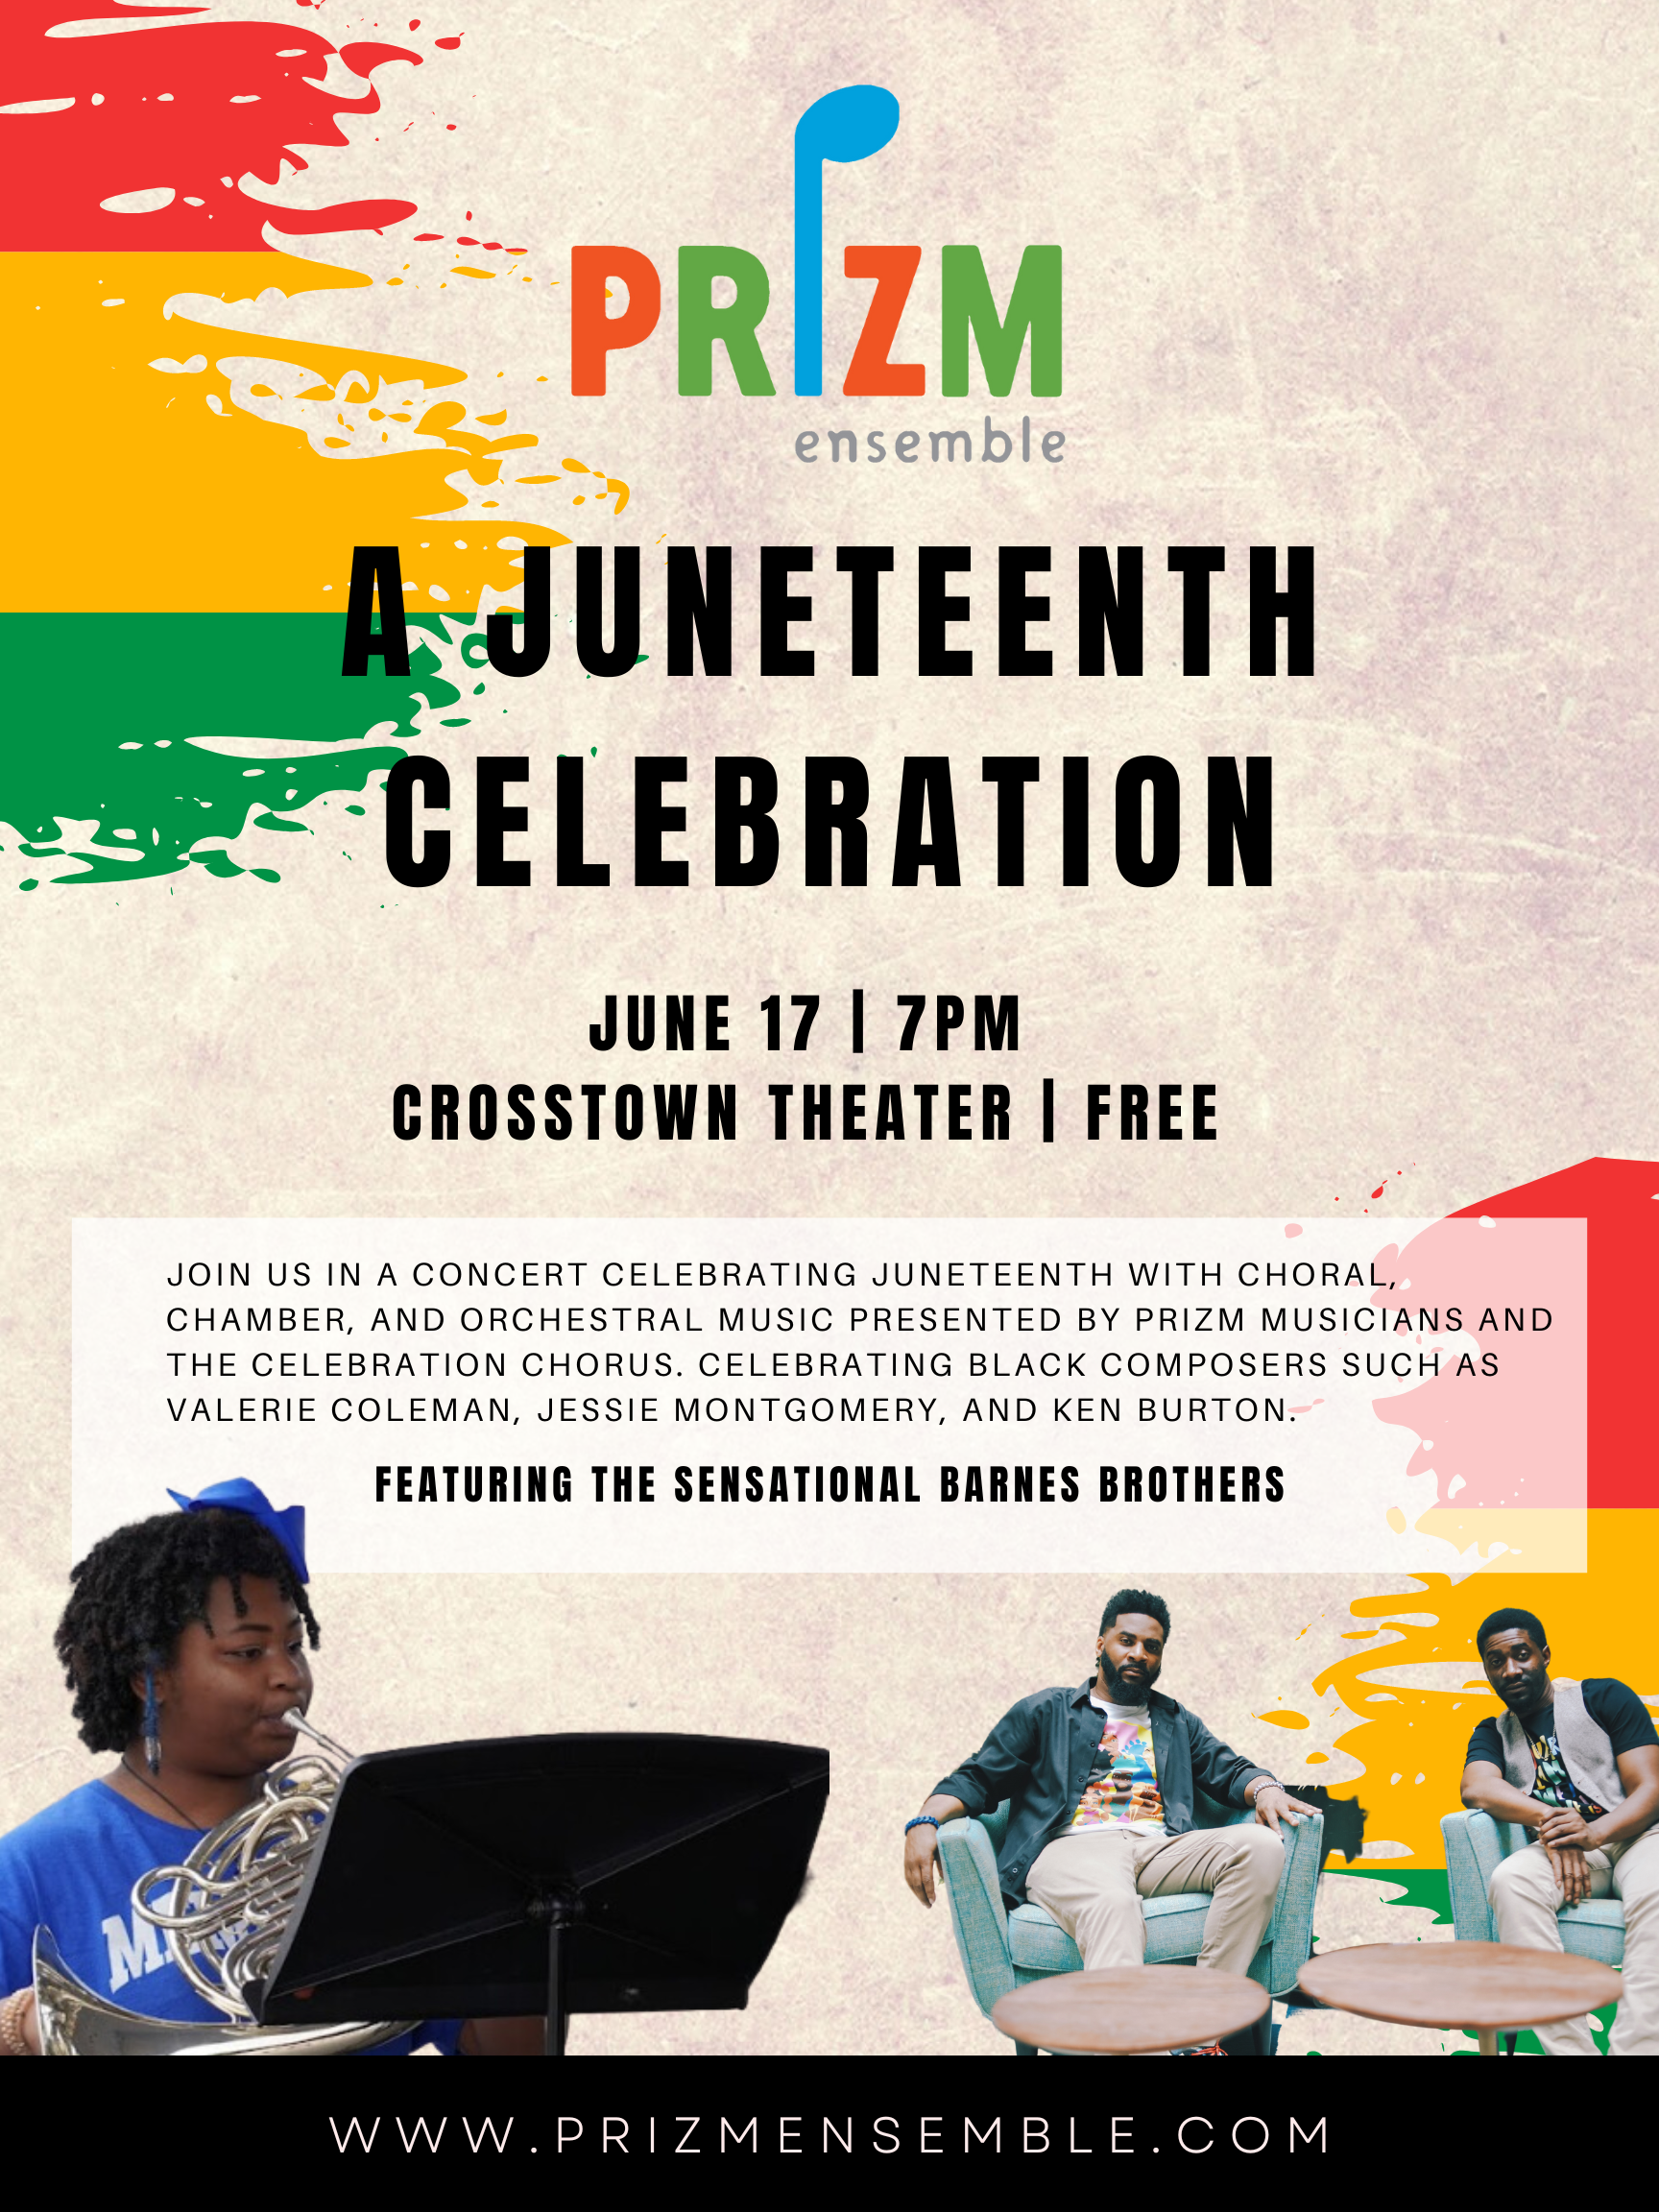 A flyer for a Juneteenth celebration in Memphis.